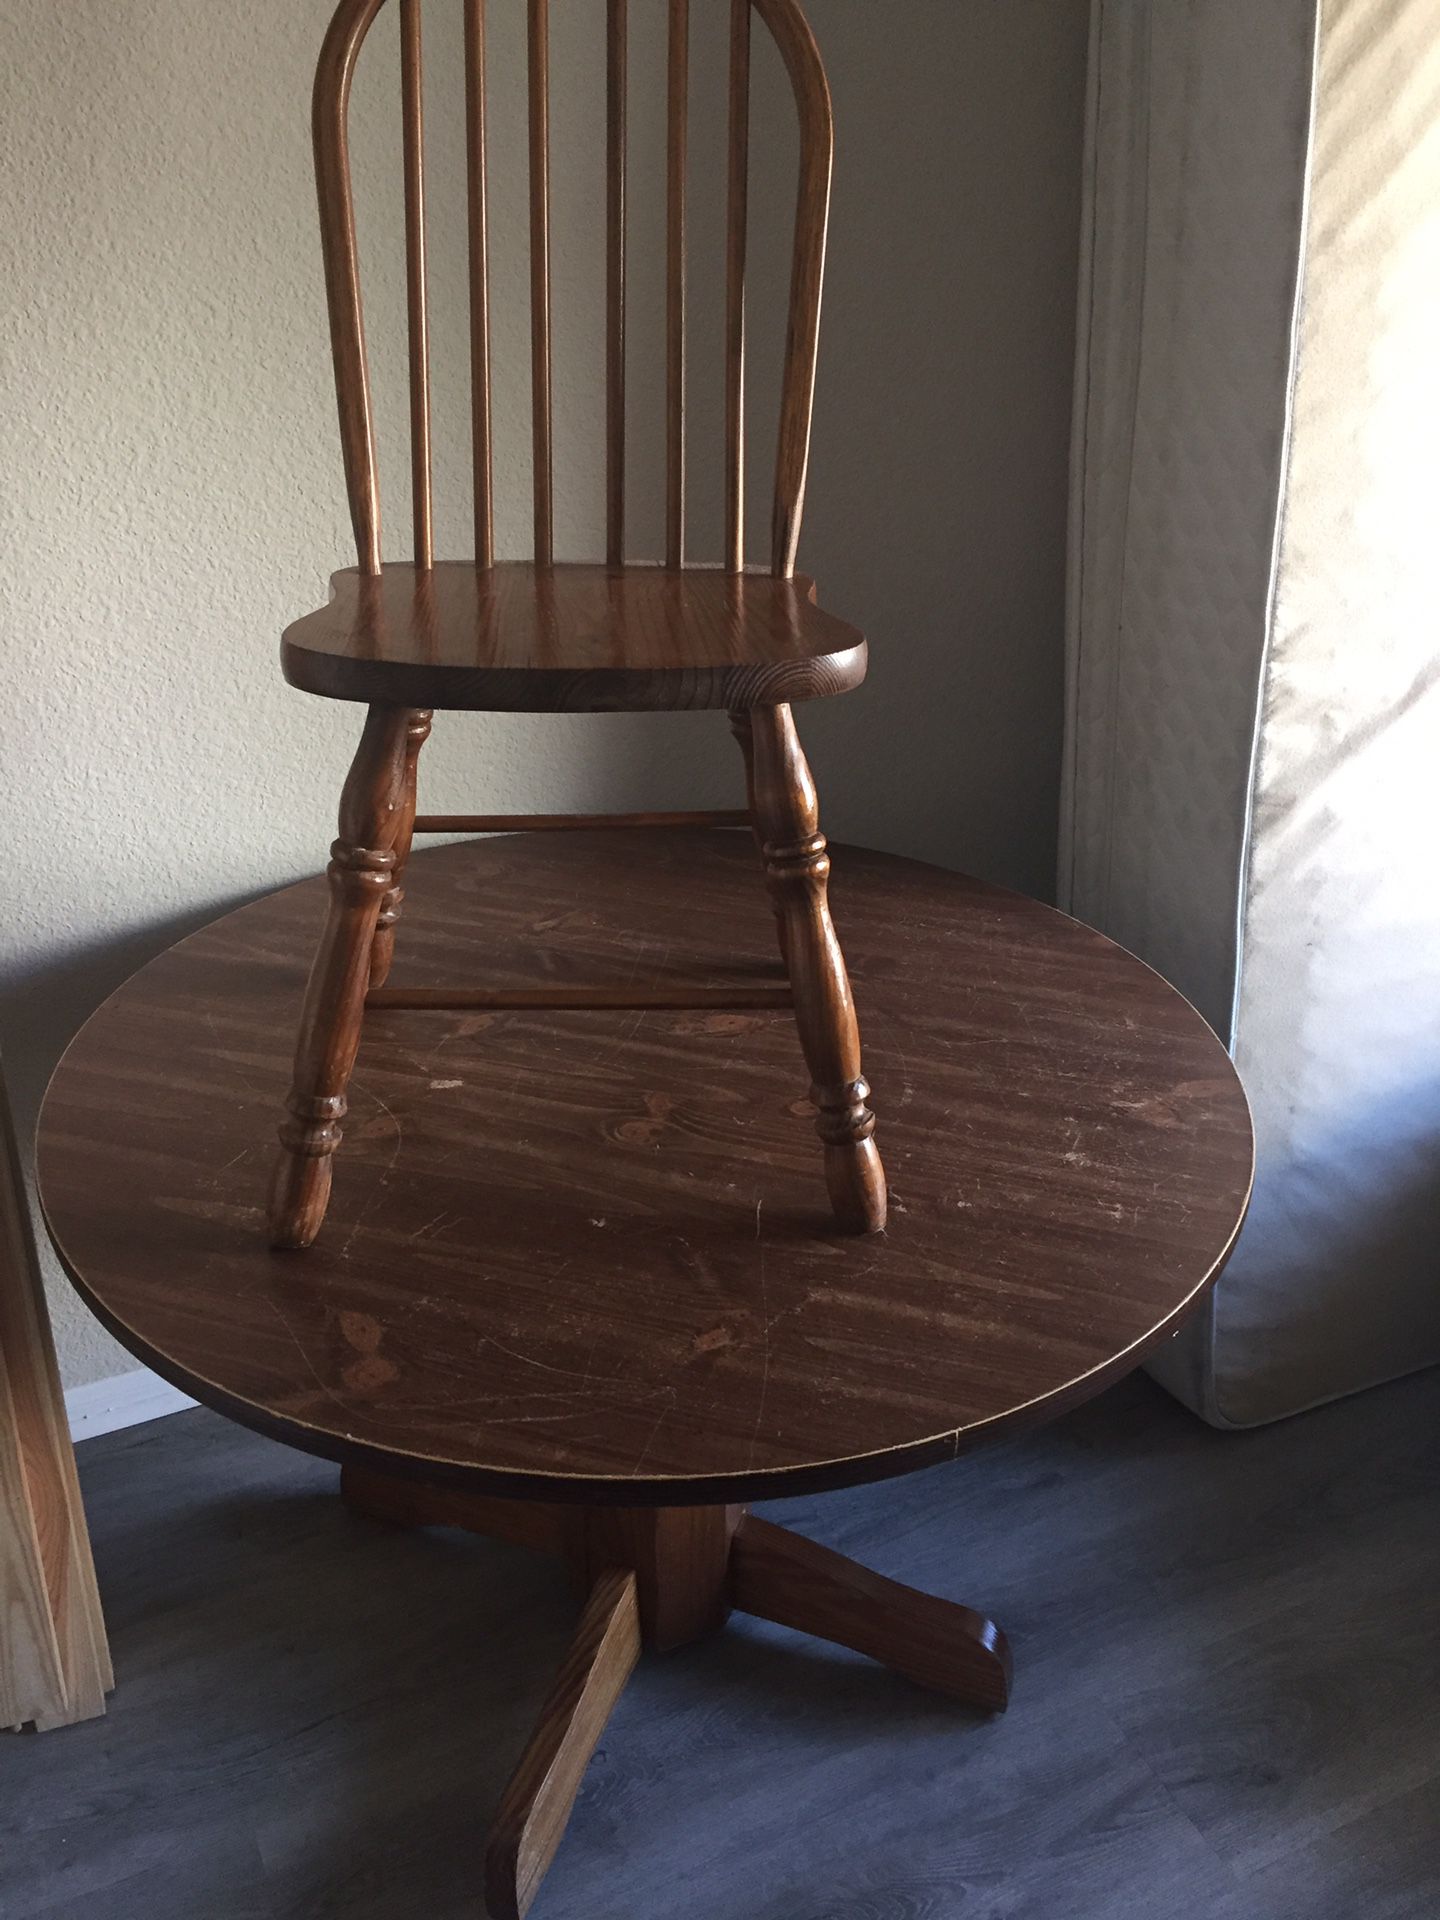 Table with four chairs